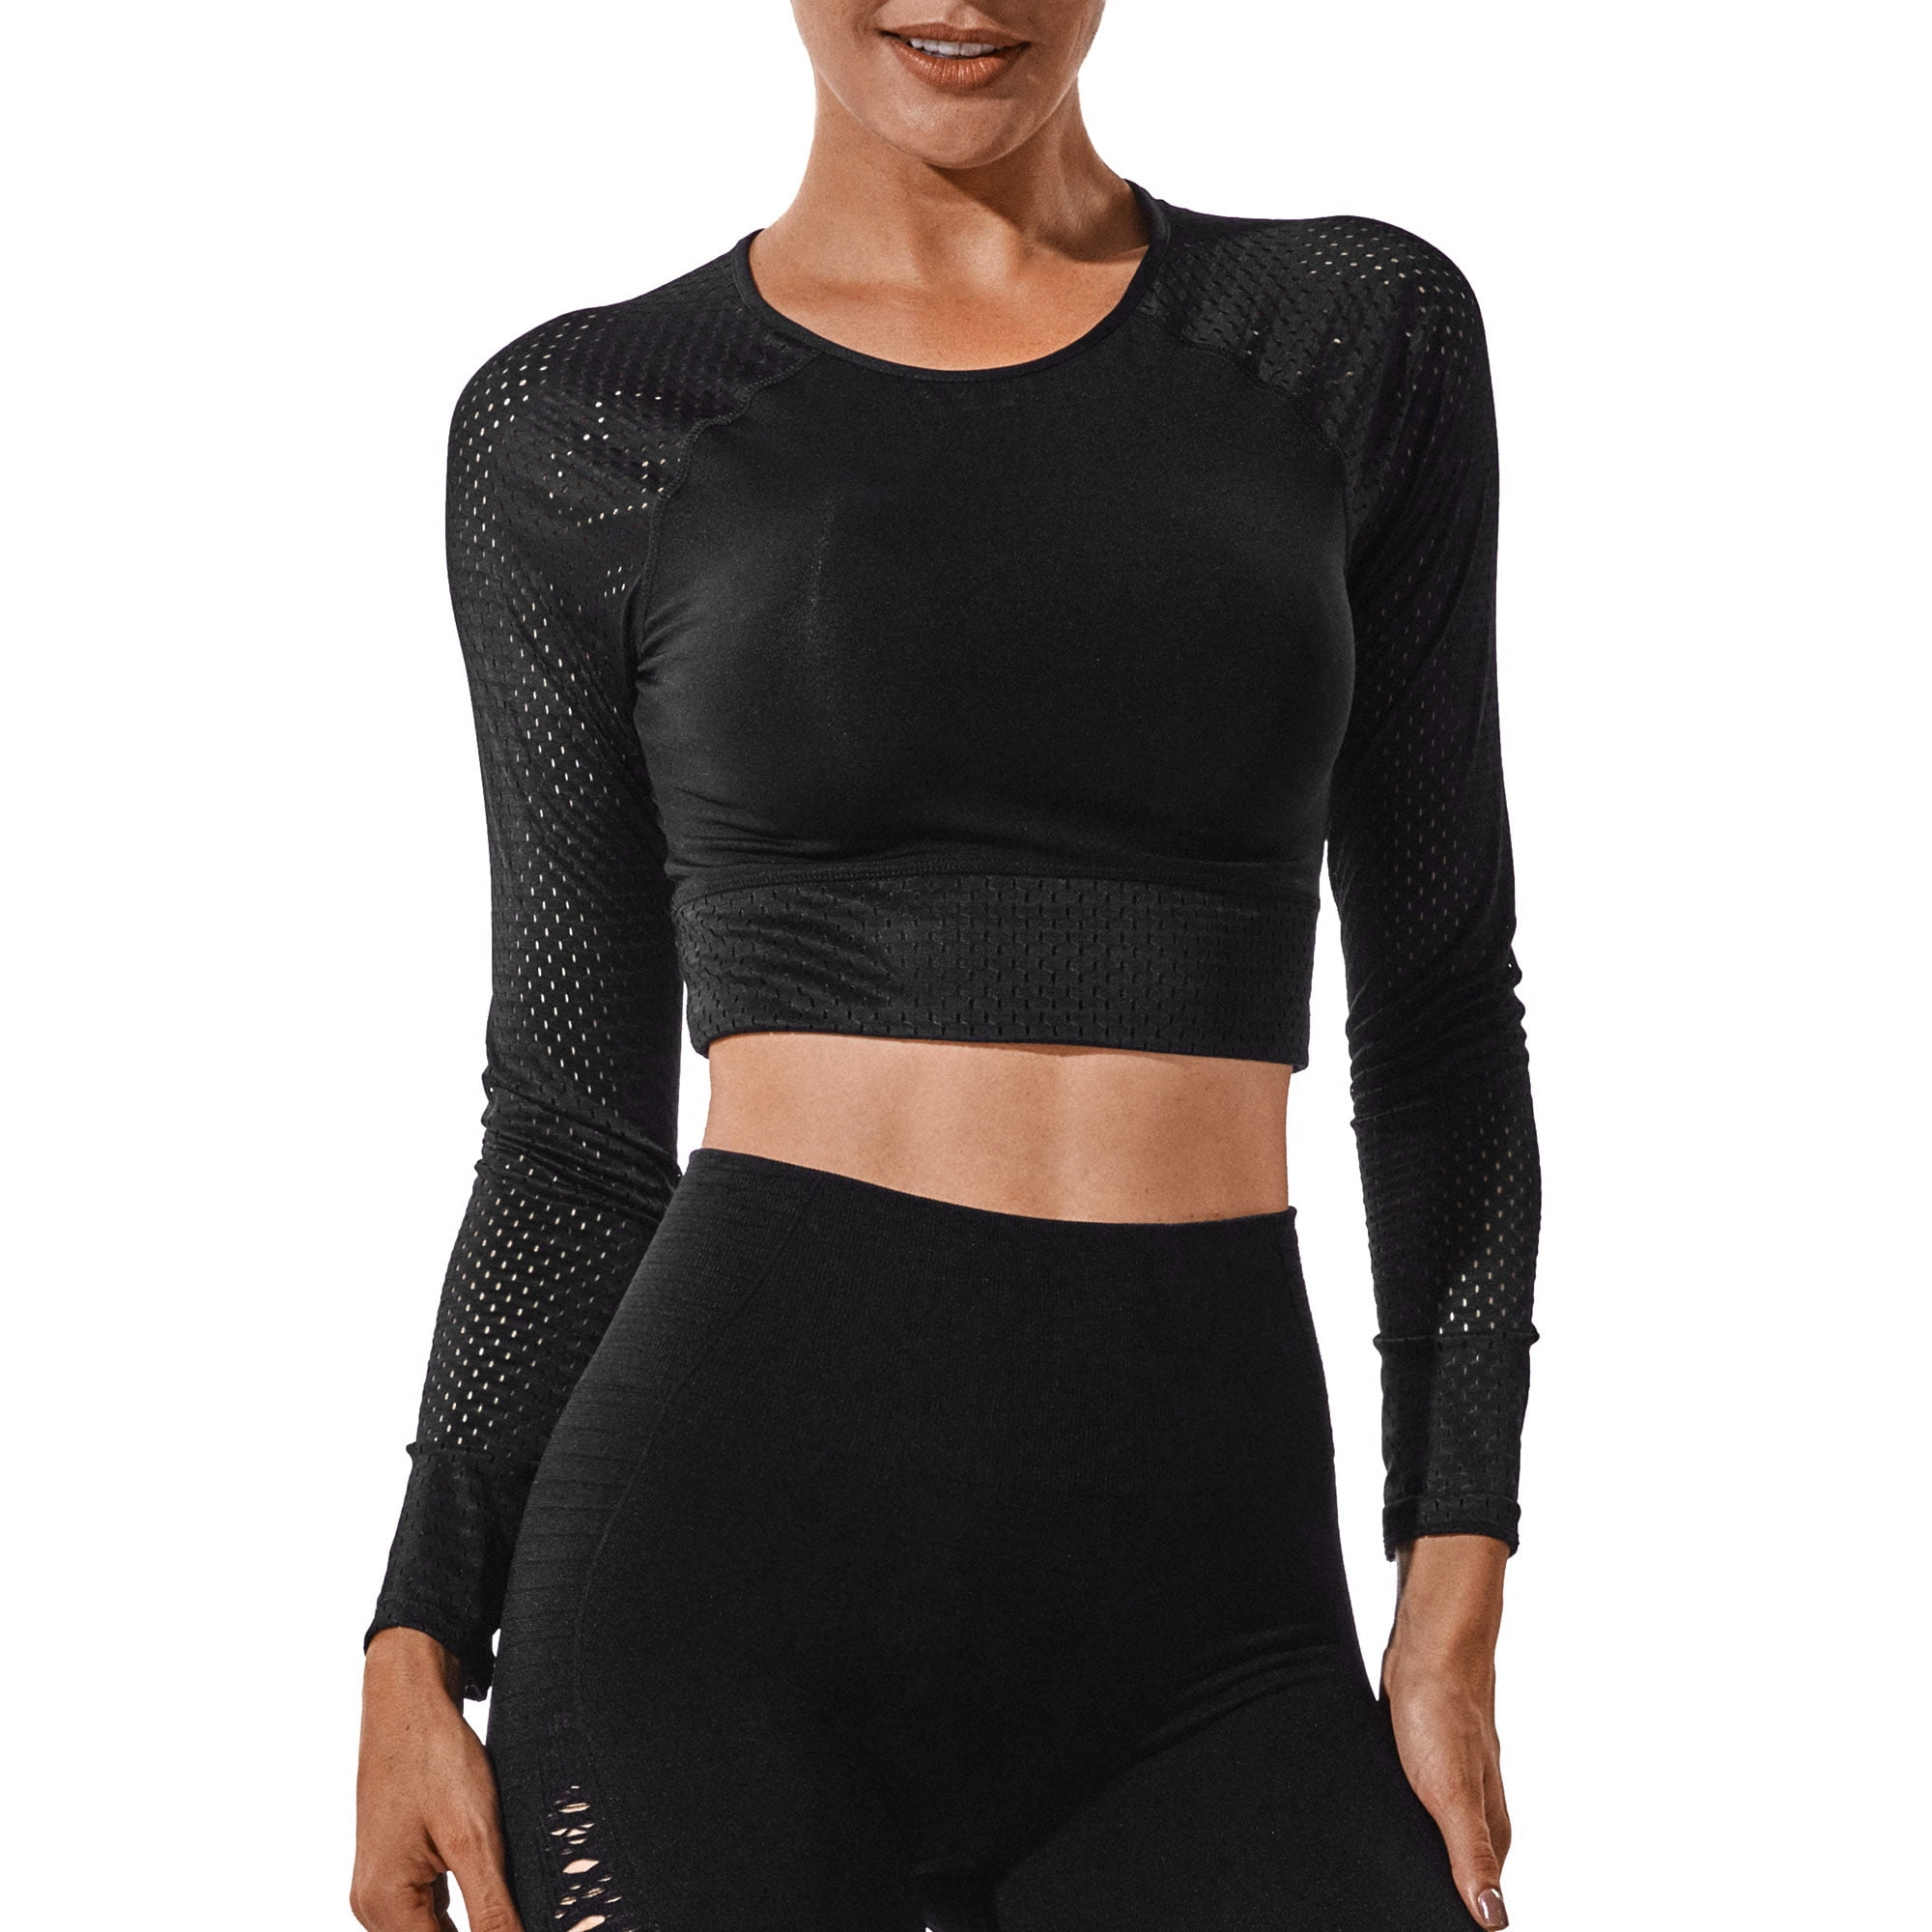 NEW Womens Long Sleeve Fitness Gym Yoga Crop Top T Shirt Active Sports Tops X102 